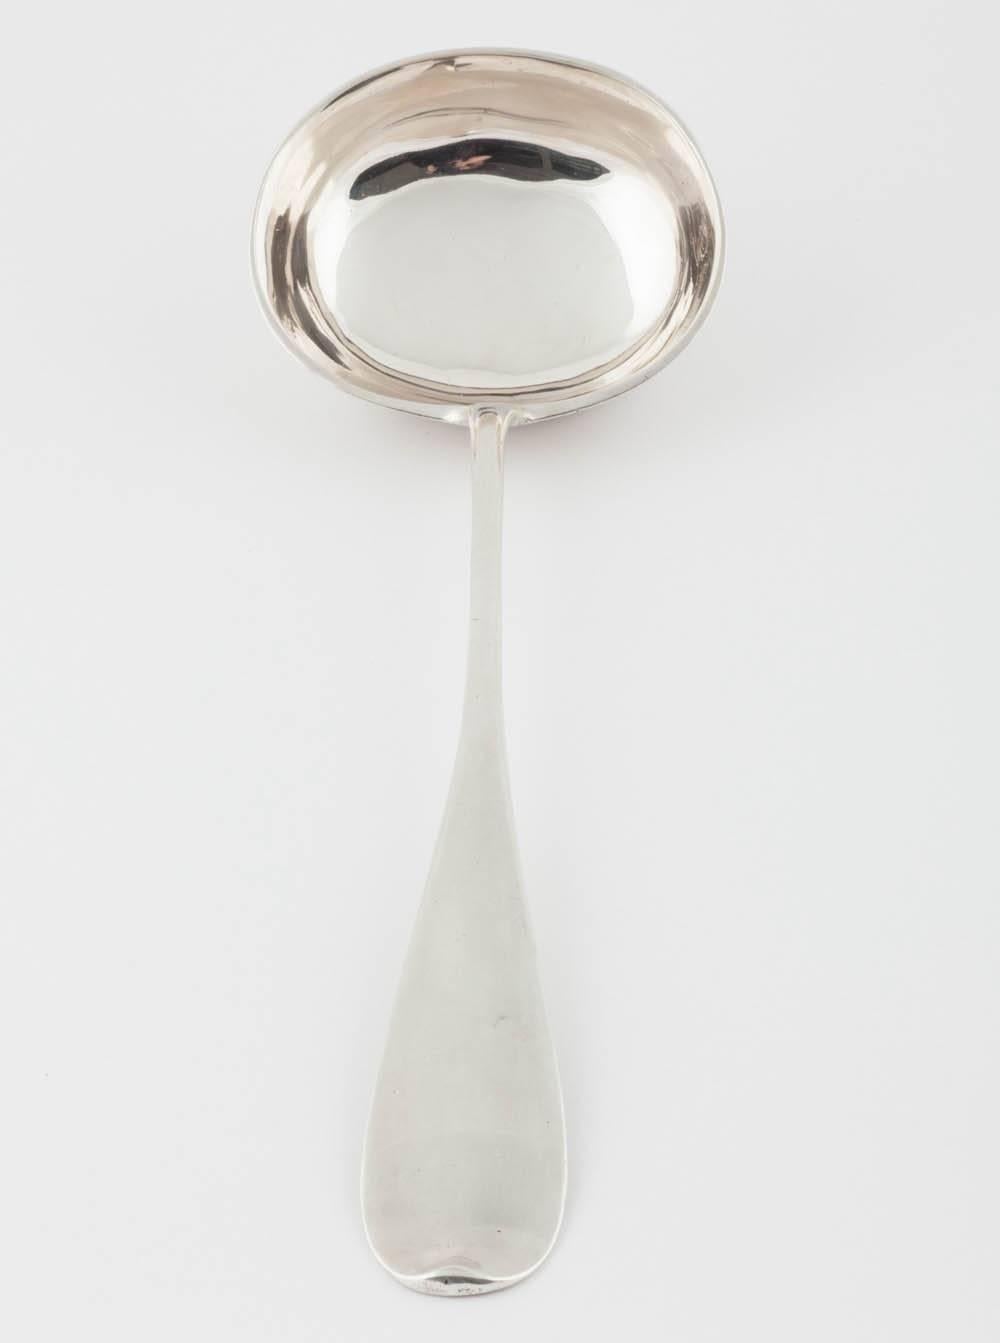 A 19th century silver soup ladle of classic design by one of Russia's best silversmiths, Khlebnikov of Moscow, from the Romanov era made during the reign of Tsar Alexander II

11 in. (27.9 cm.) long. 

Fully hallmarked with the imperial warrant of